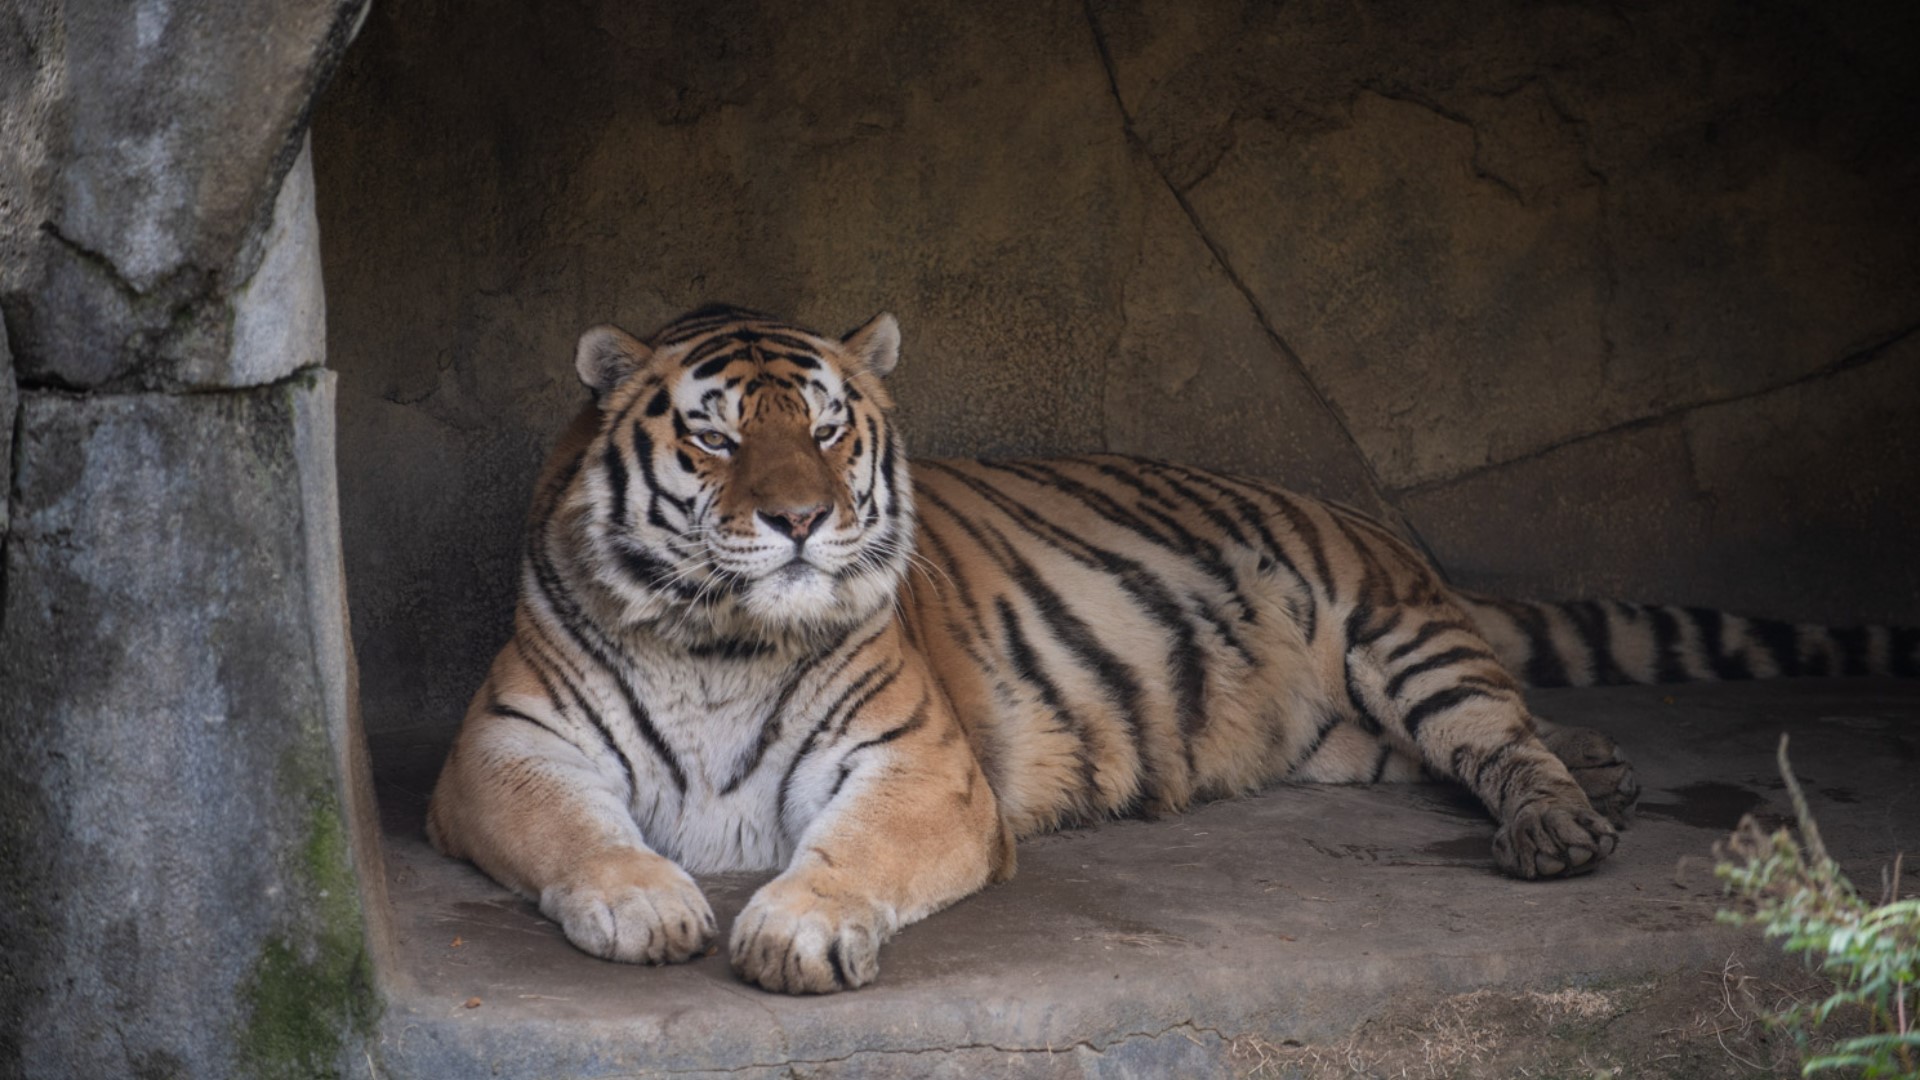 The tiger, named Jupiter, was reported to be acting sick by his care team on June 22.